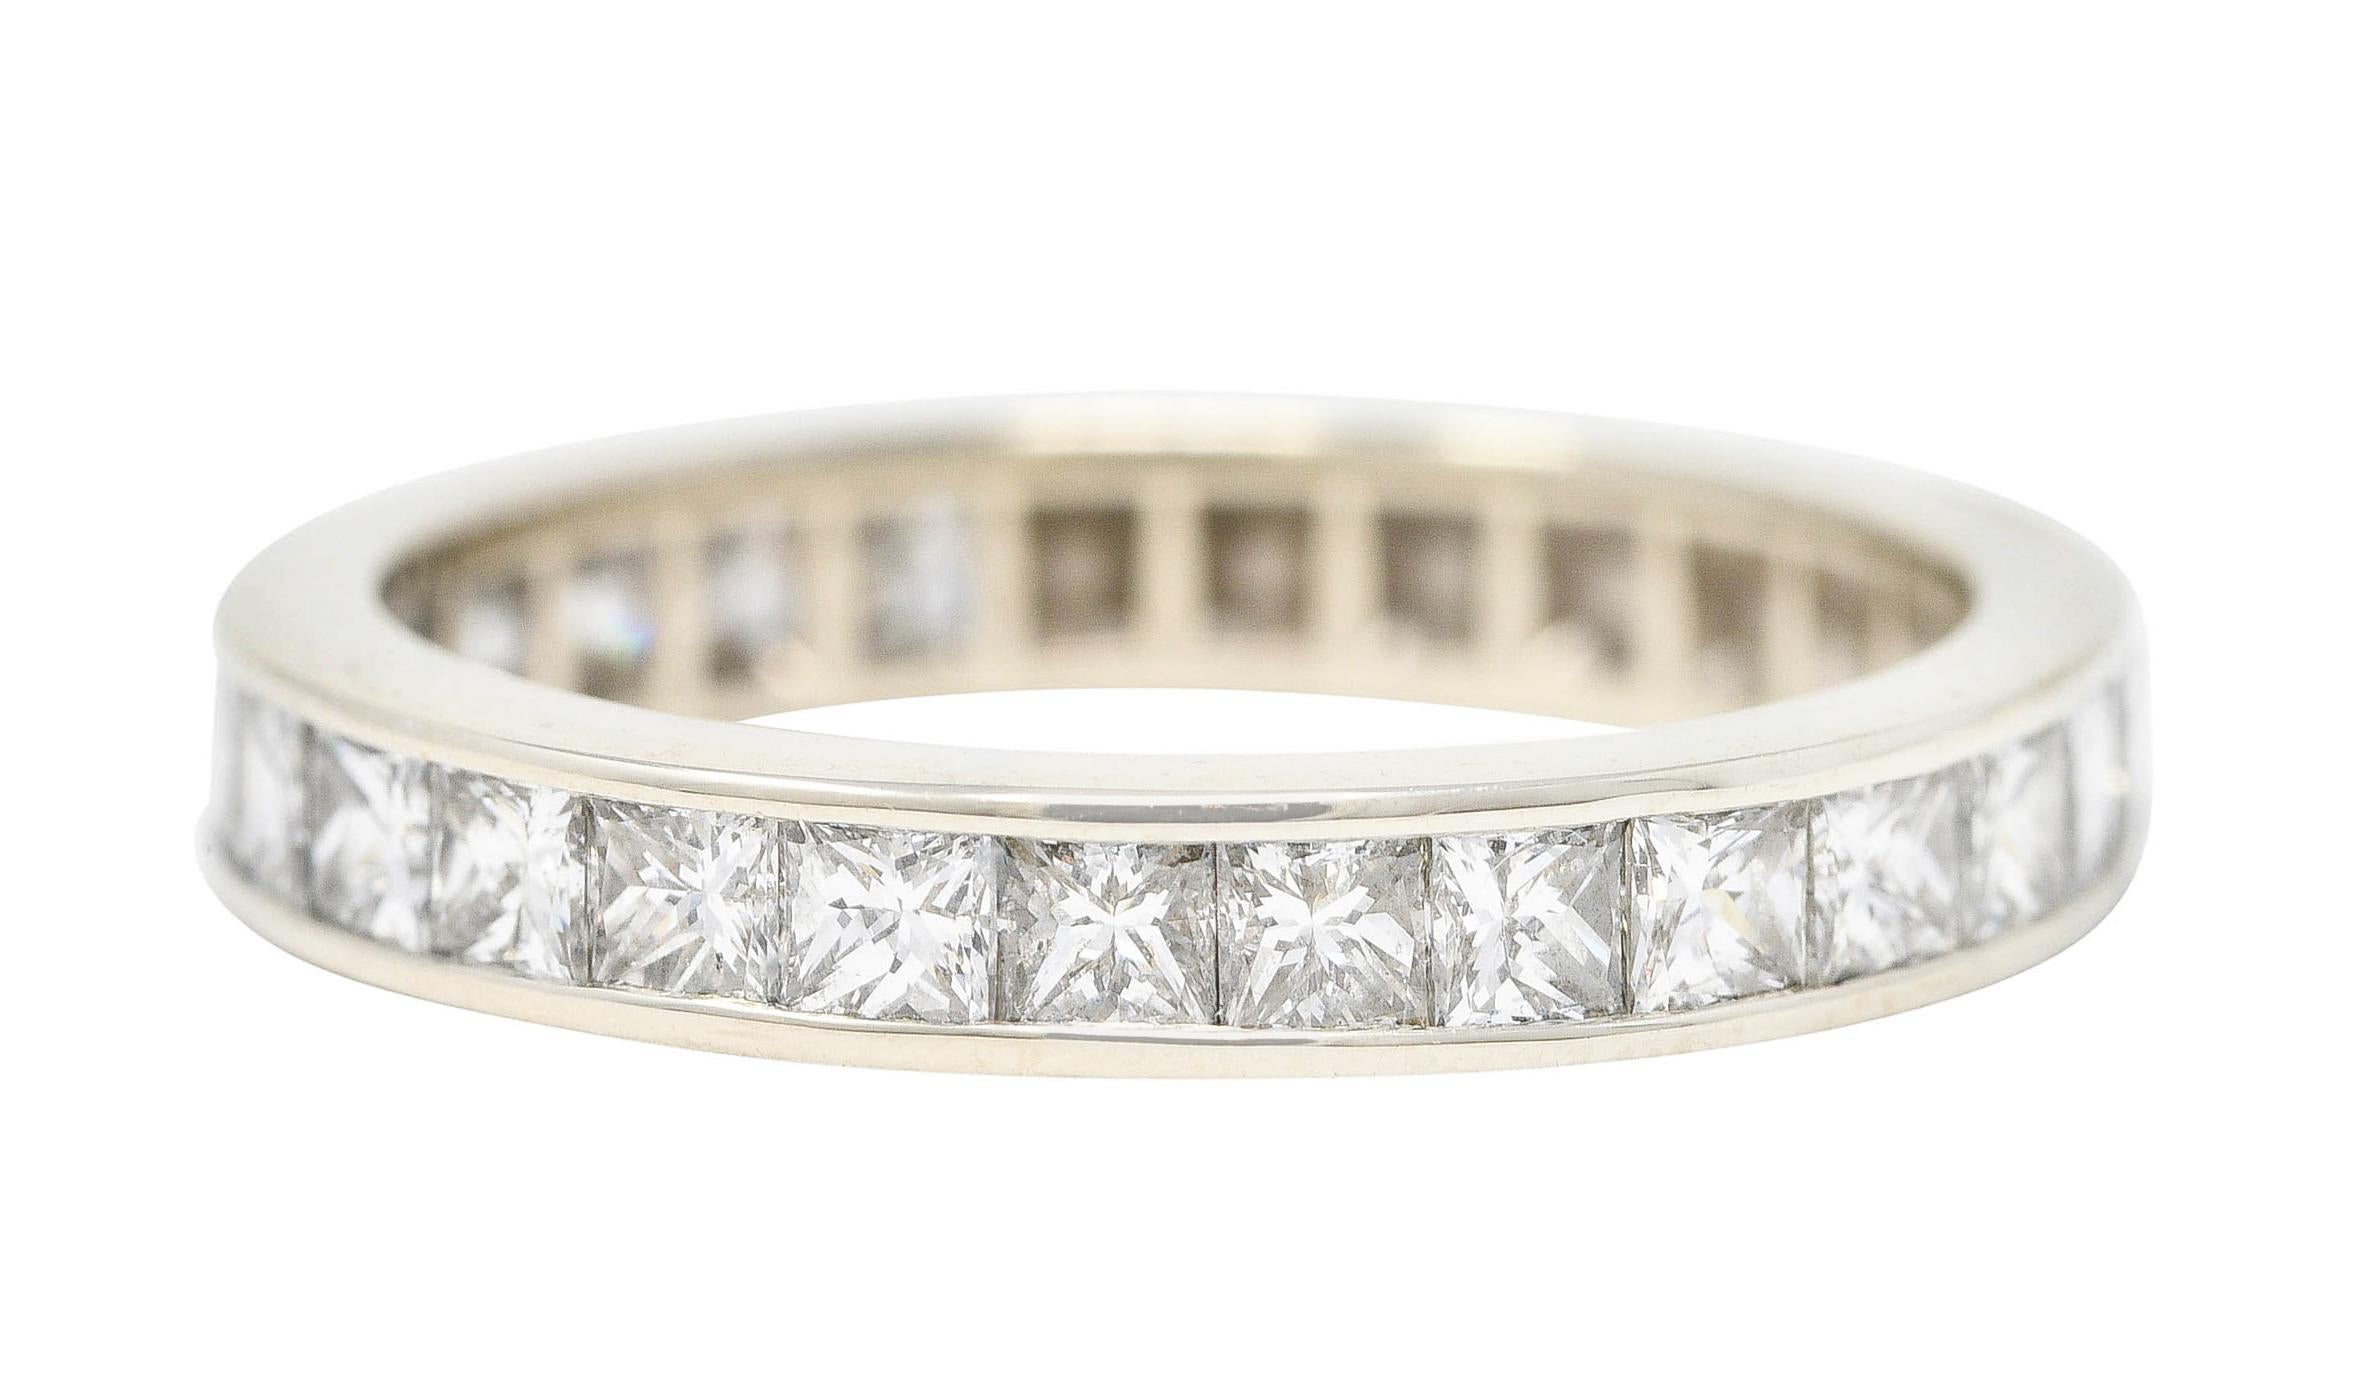 Band style ring channel set to front with princess cut diamonds

Weighing approximately 1.00 carat total - G to I in color with primarily VS clarity

Completed by high polished channel walls

Tested as 18 karat white gold

Circa: 2000's

Ring size: